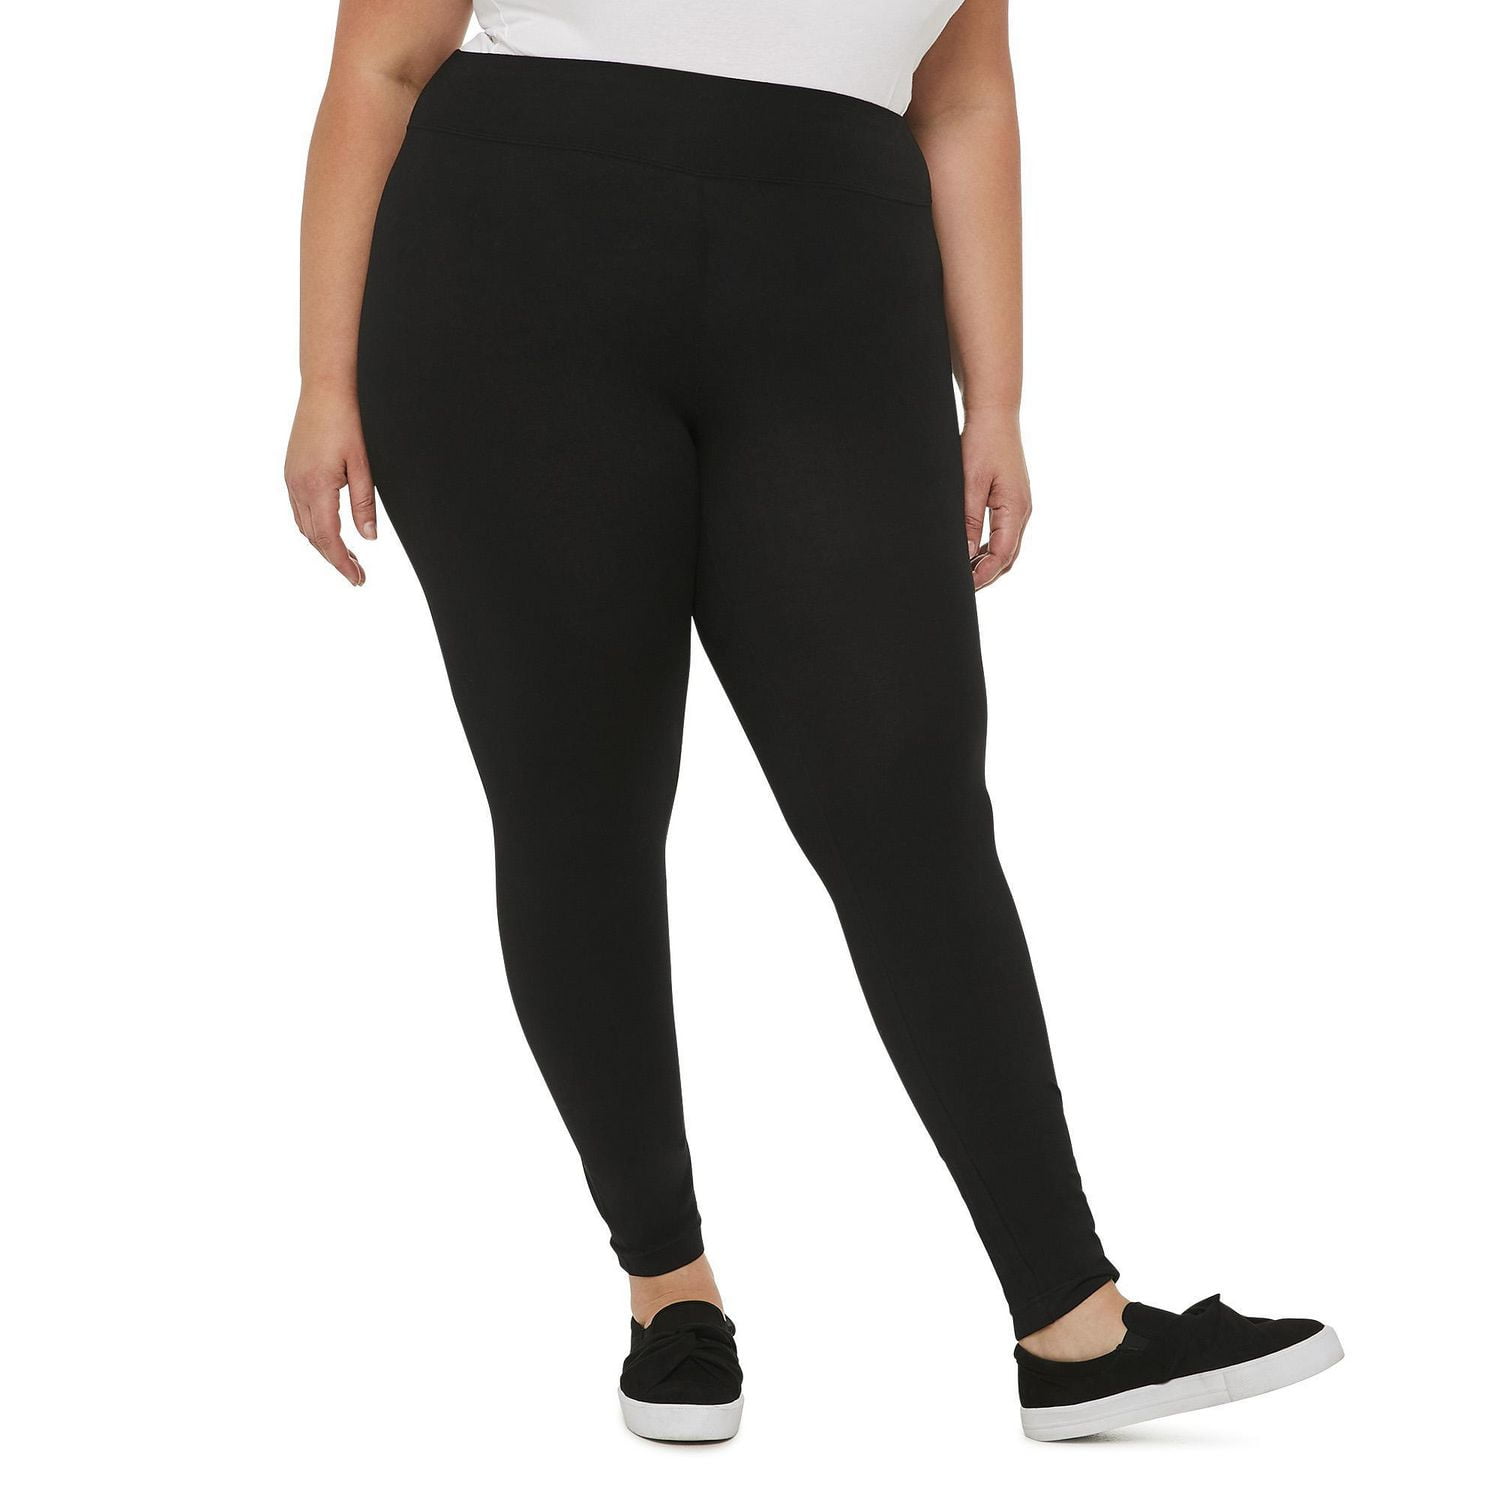  Women's Leggings - Oranges / Women's Leggings / Women's  Clothing: Clothing, Shoes & Jewelry